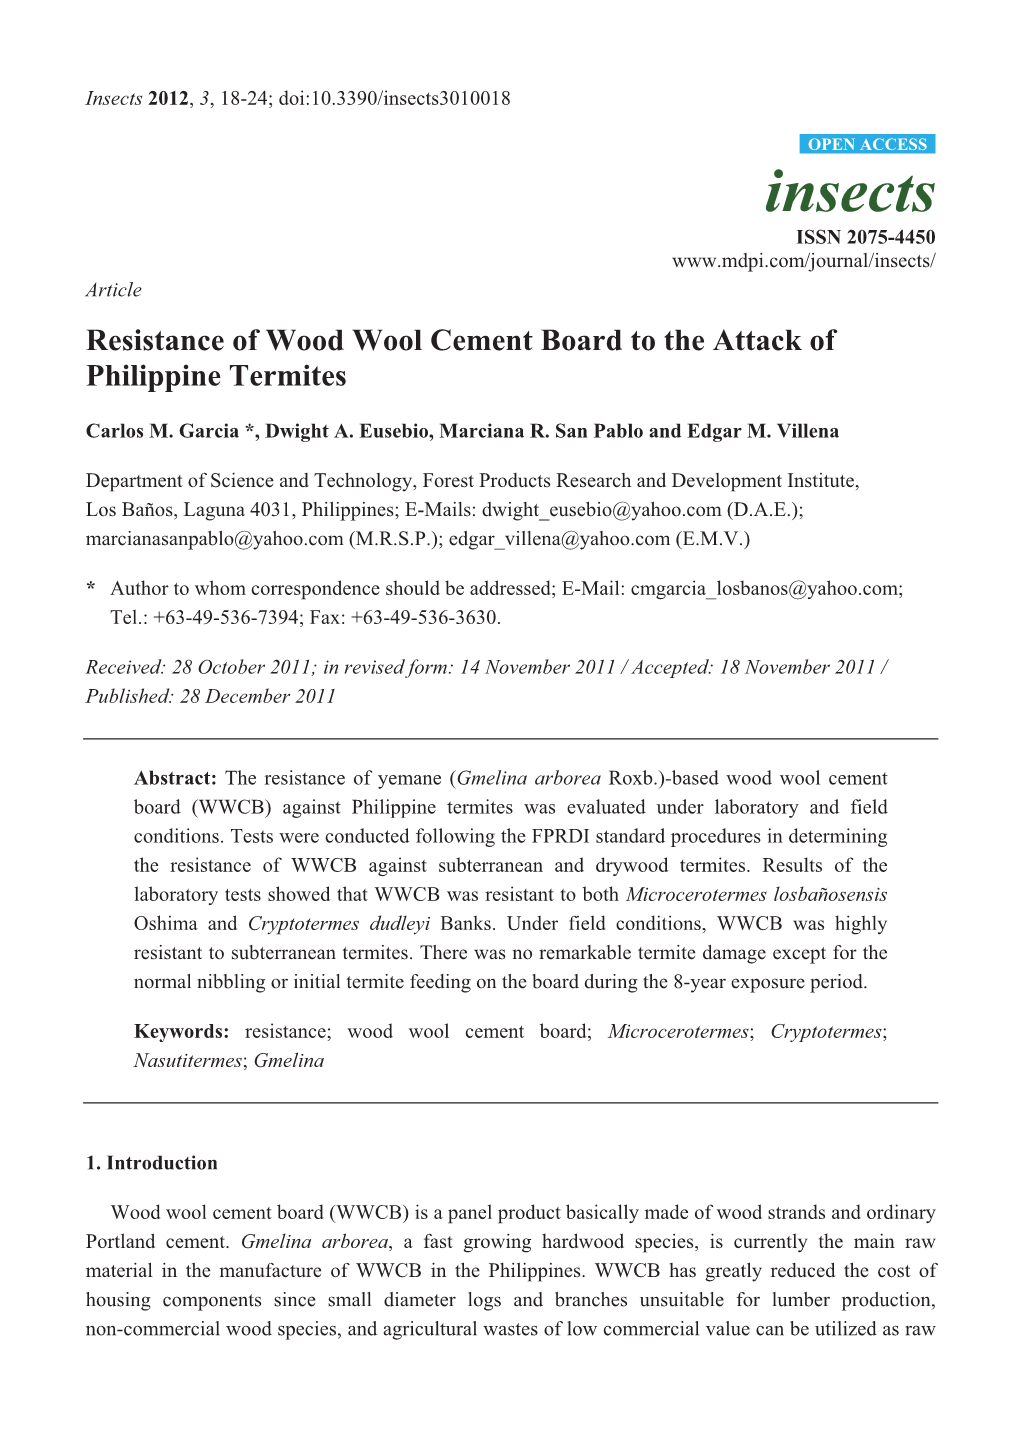 Resistance of Wood Wool Cement Board to the Attack of Philippine Termites